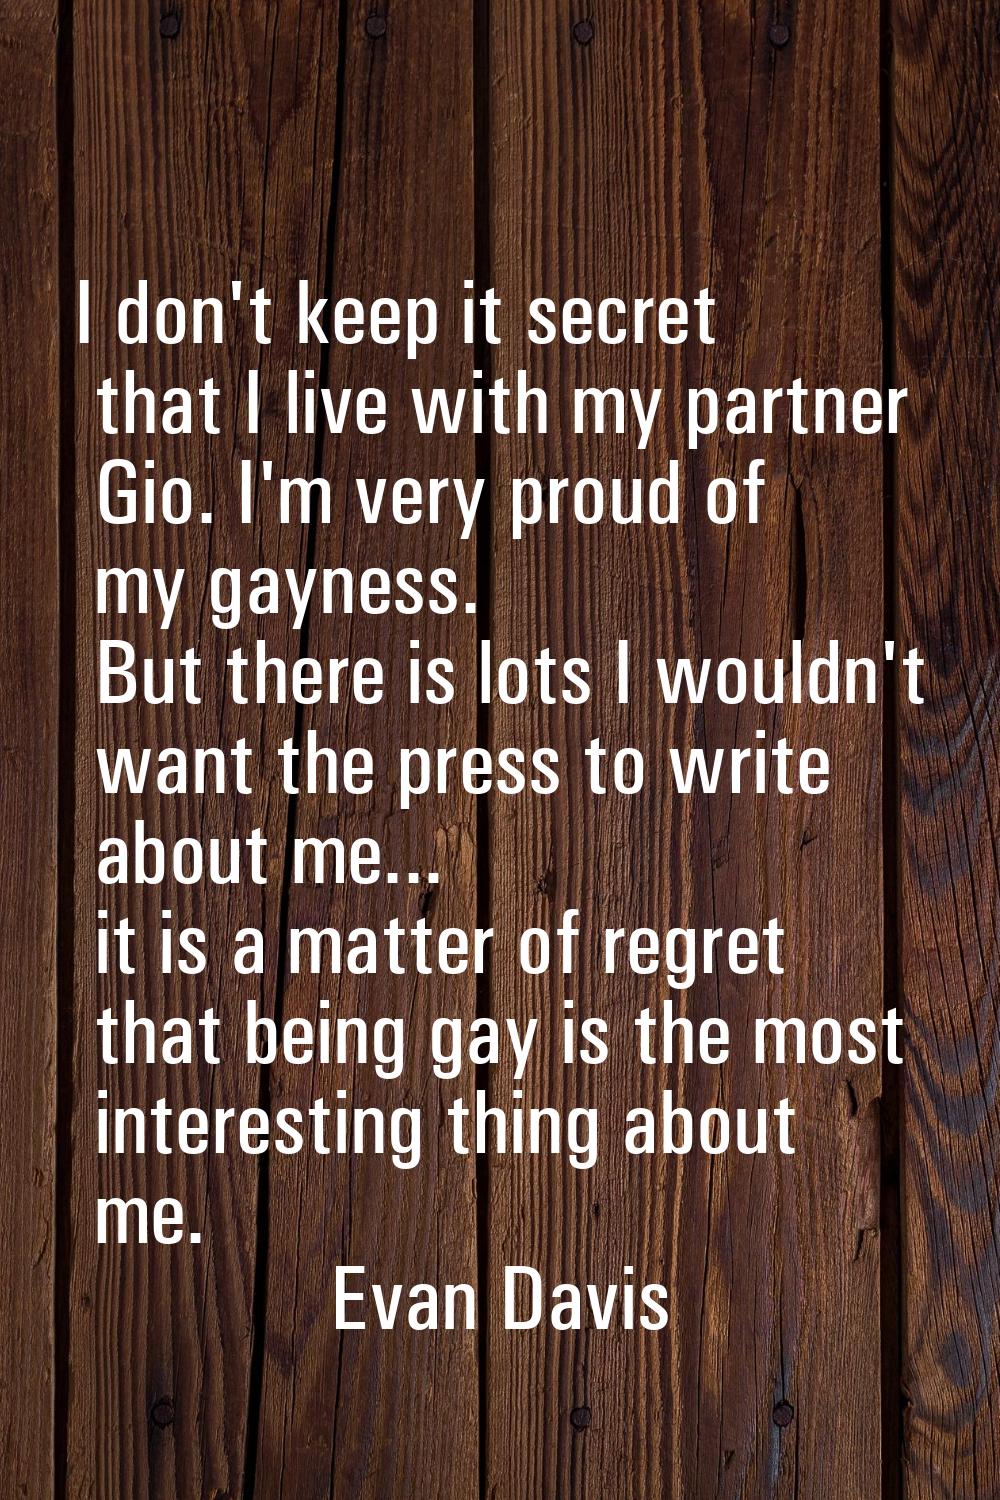 I don't keep it secret that I live with my partner Gio. I'm very proud of my gayness. But there is 